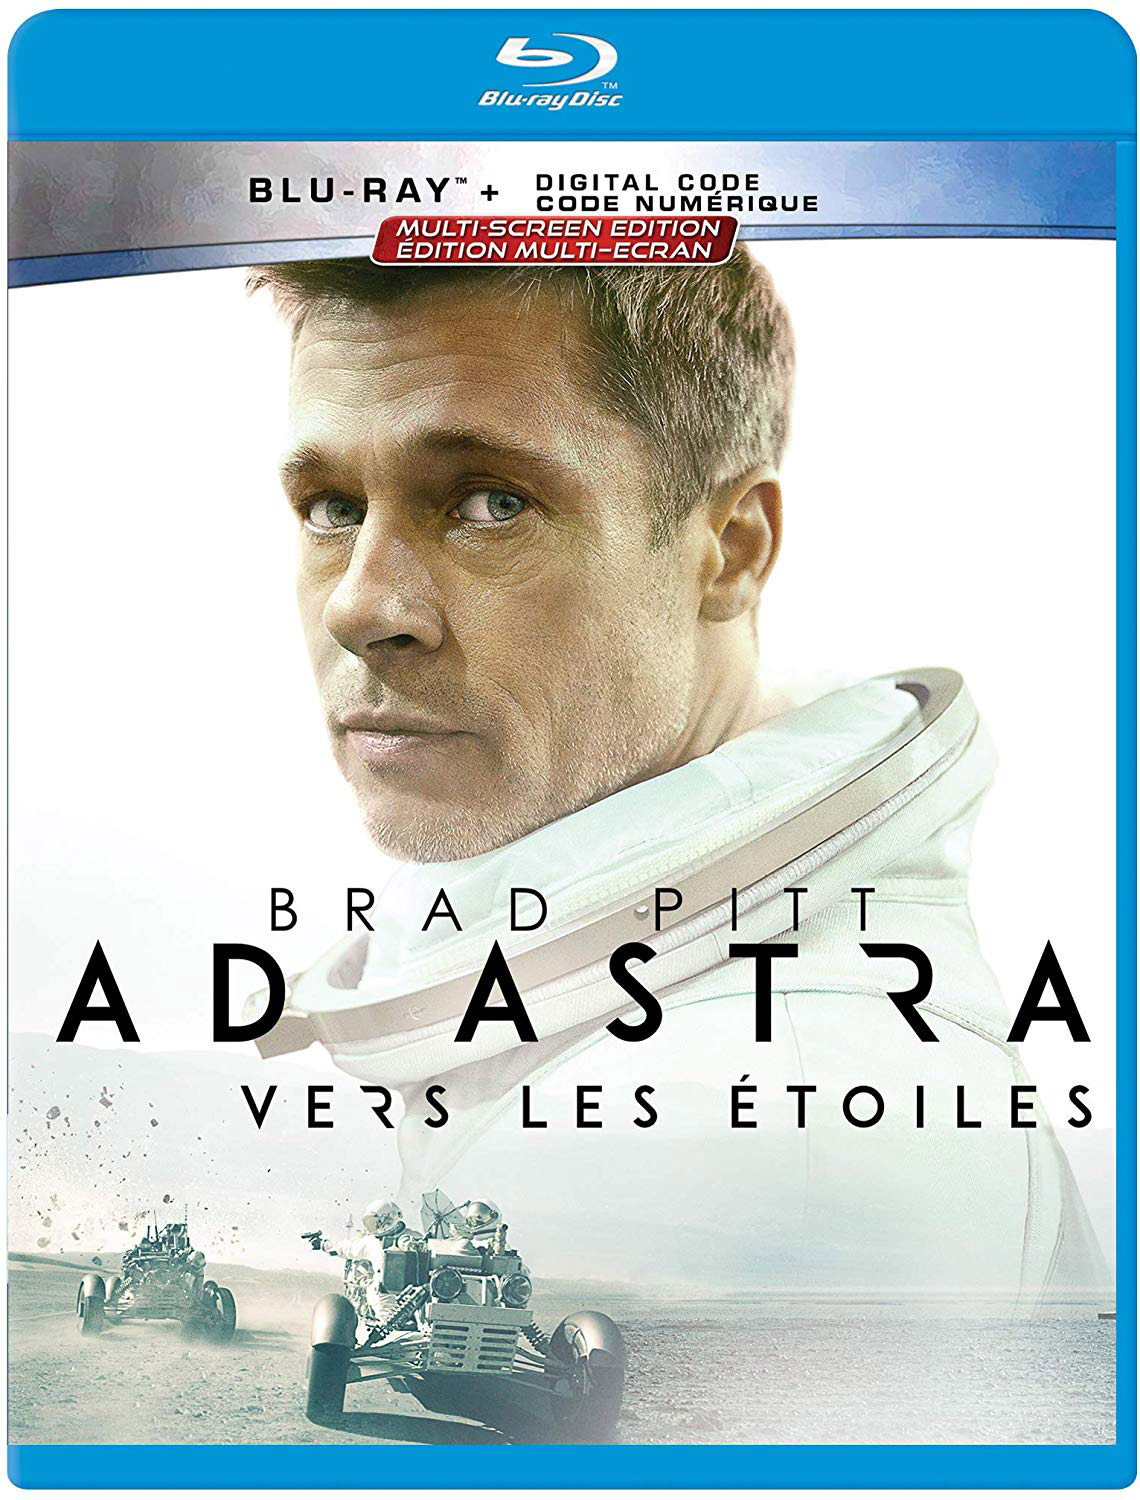 Ad Astra on Blu-ray